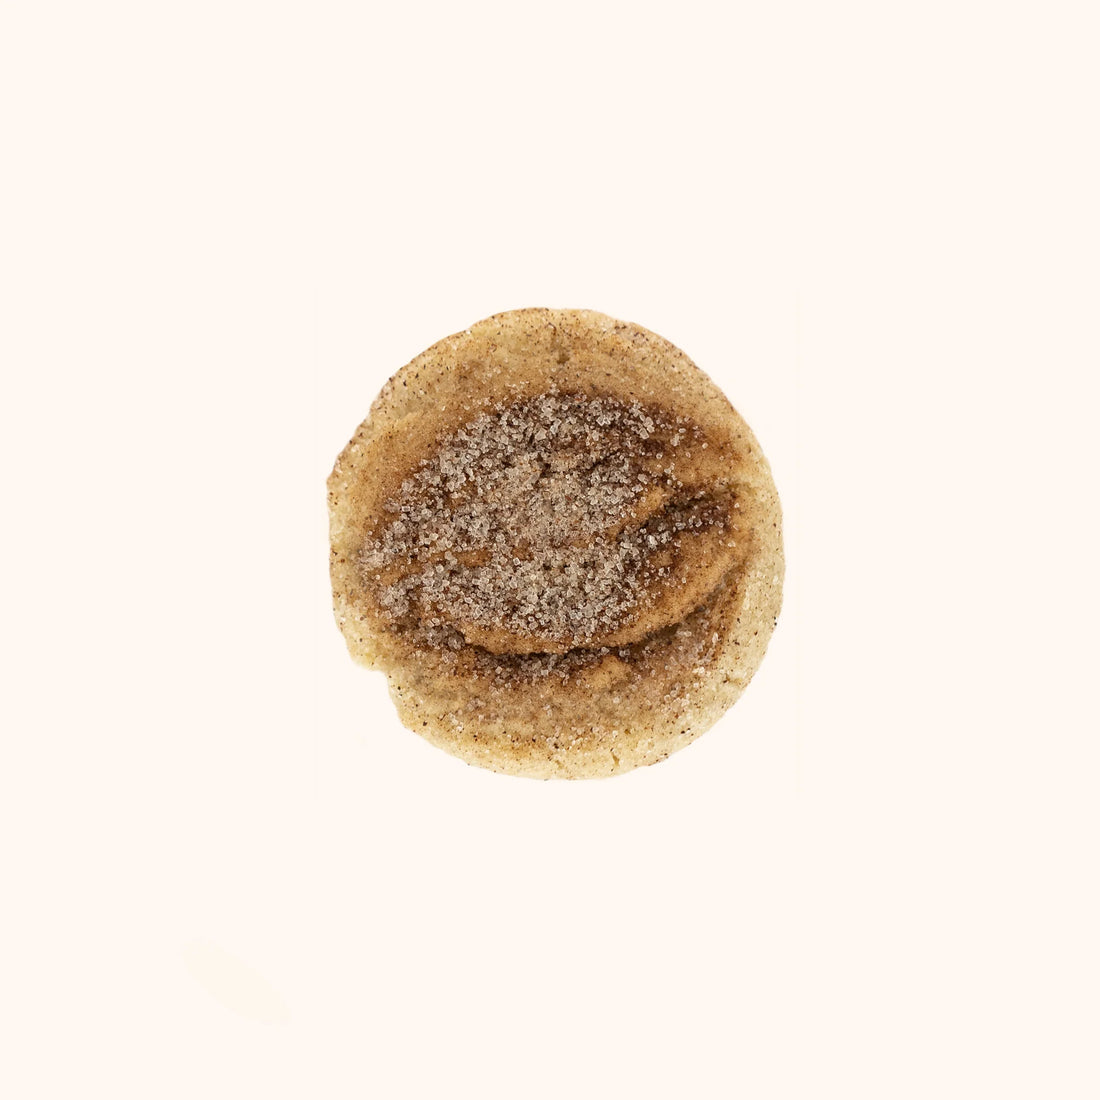 ***NEW SNICKERDOODLE SINGLE SNACK PACKS*** - Bell’s Reines